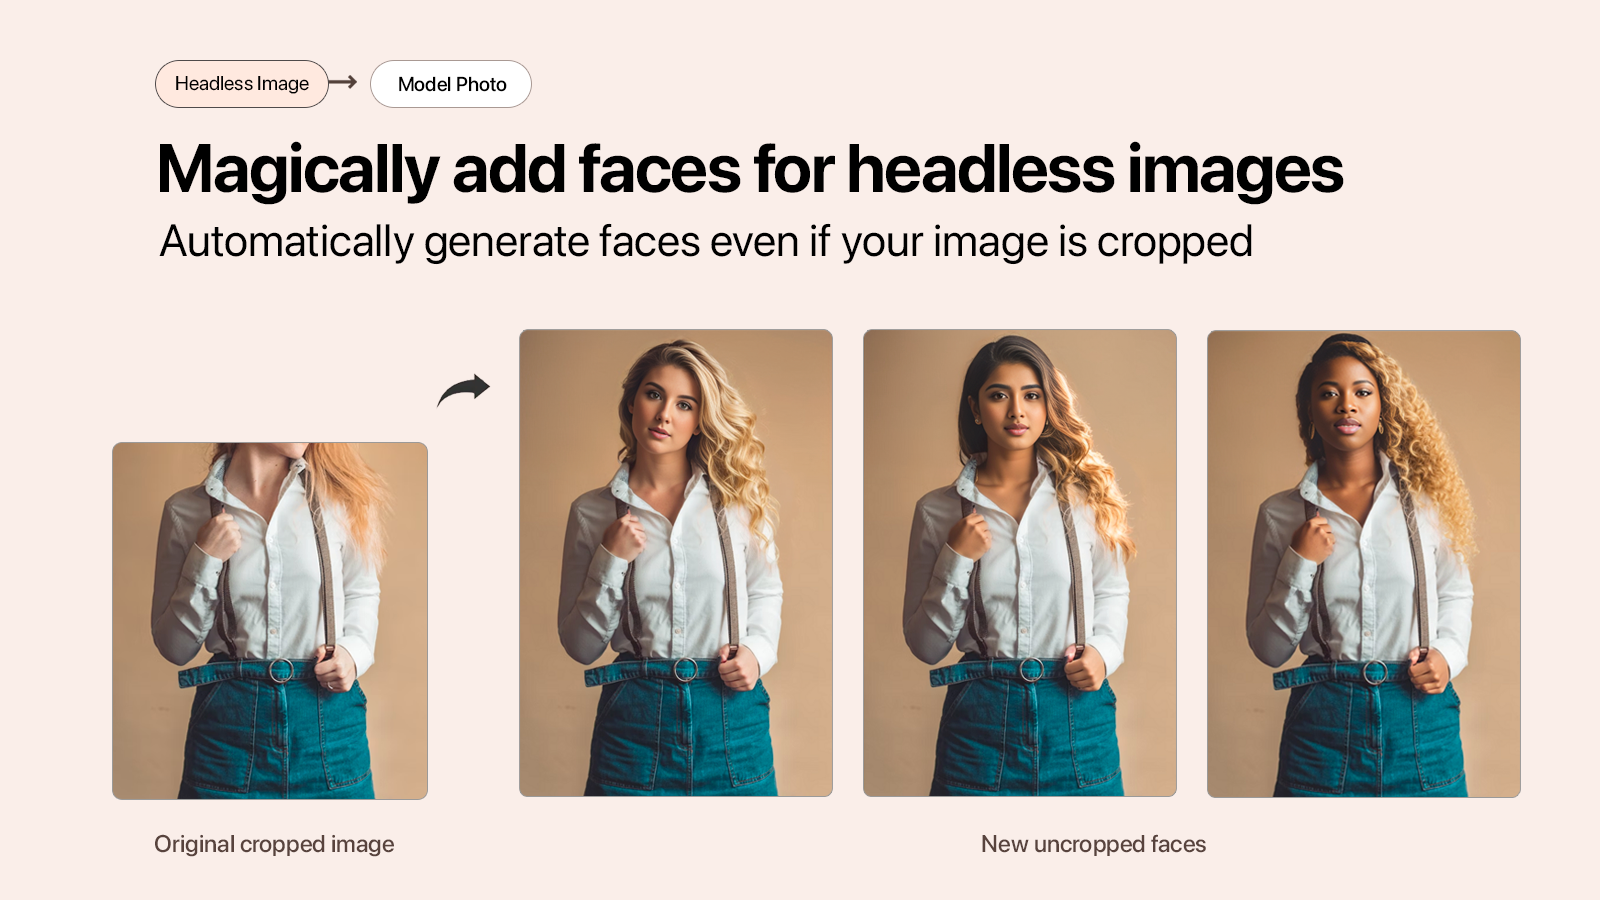 Magically add faces to headless images